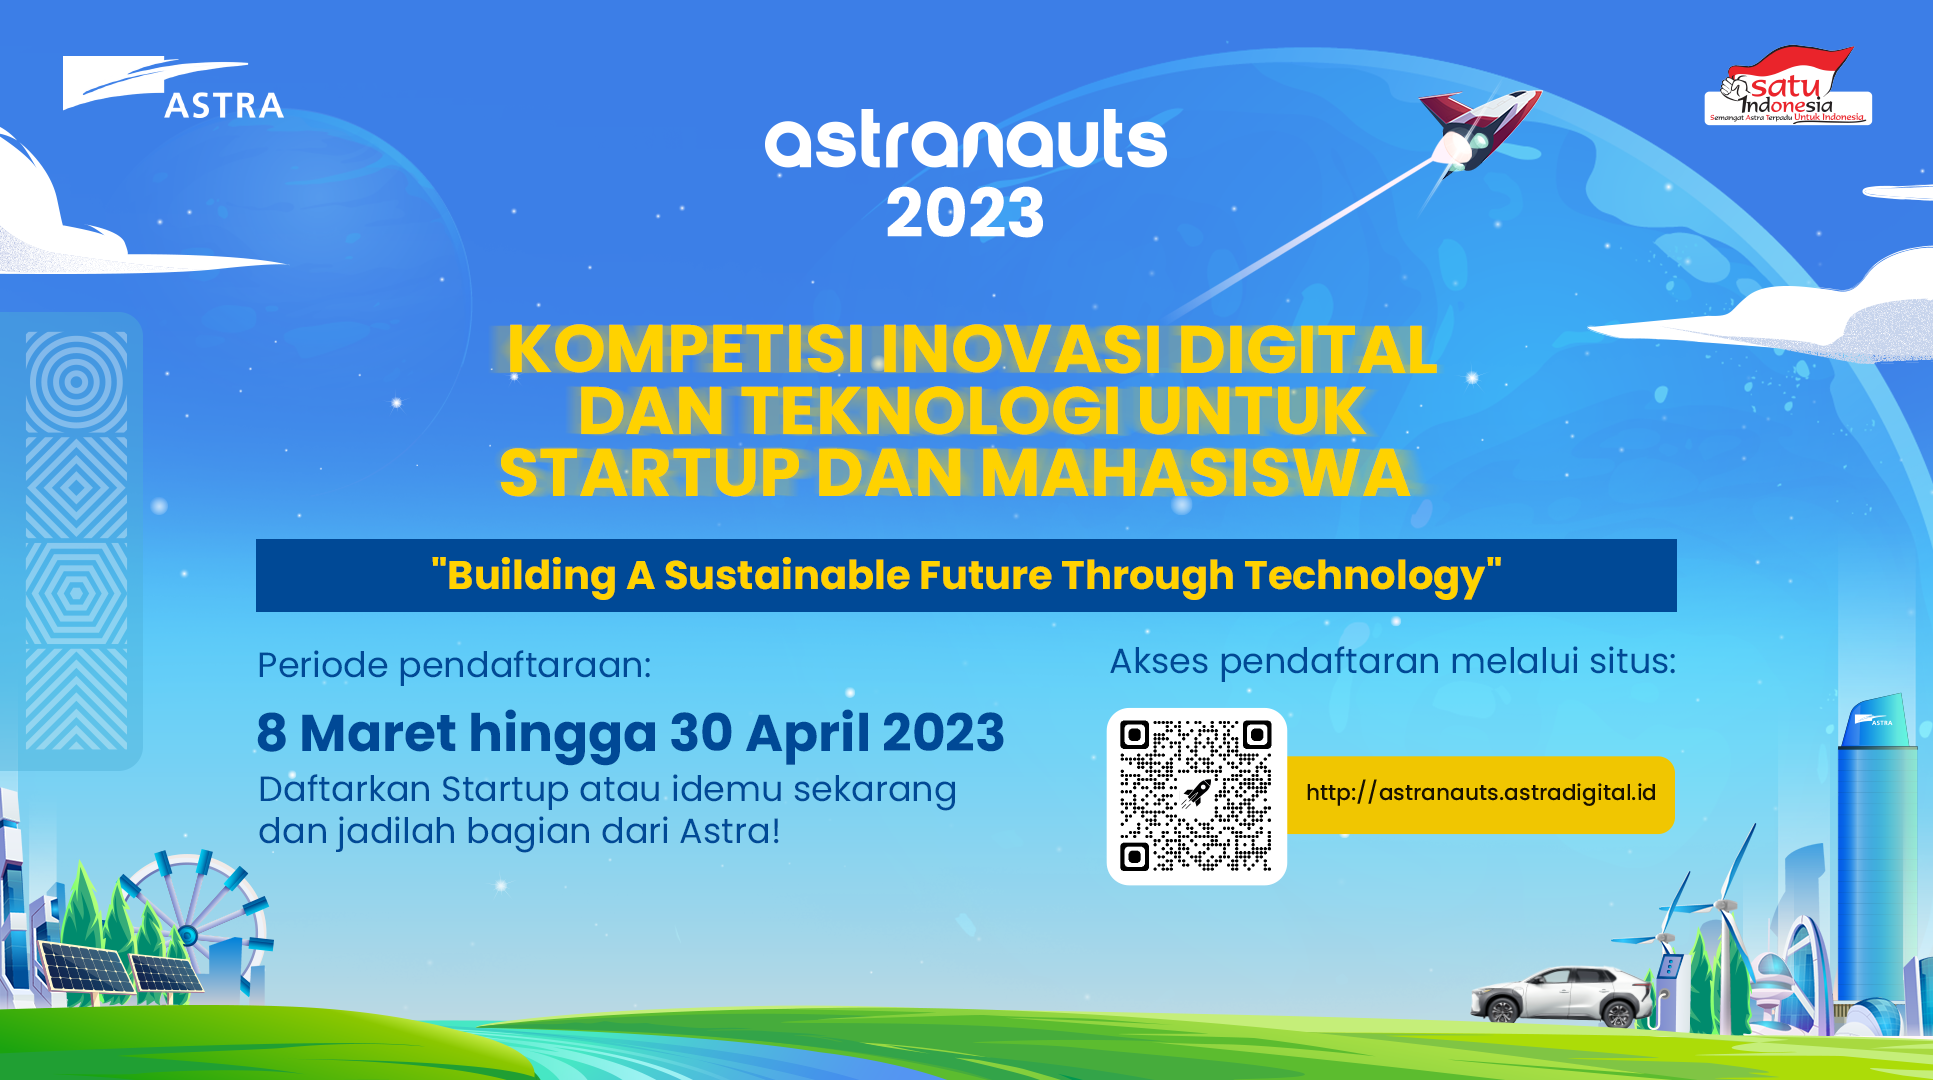 Astranauts 2023: The Digital and Technological Innovation Competition for Students and Startups in Indonesia